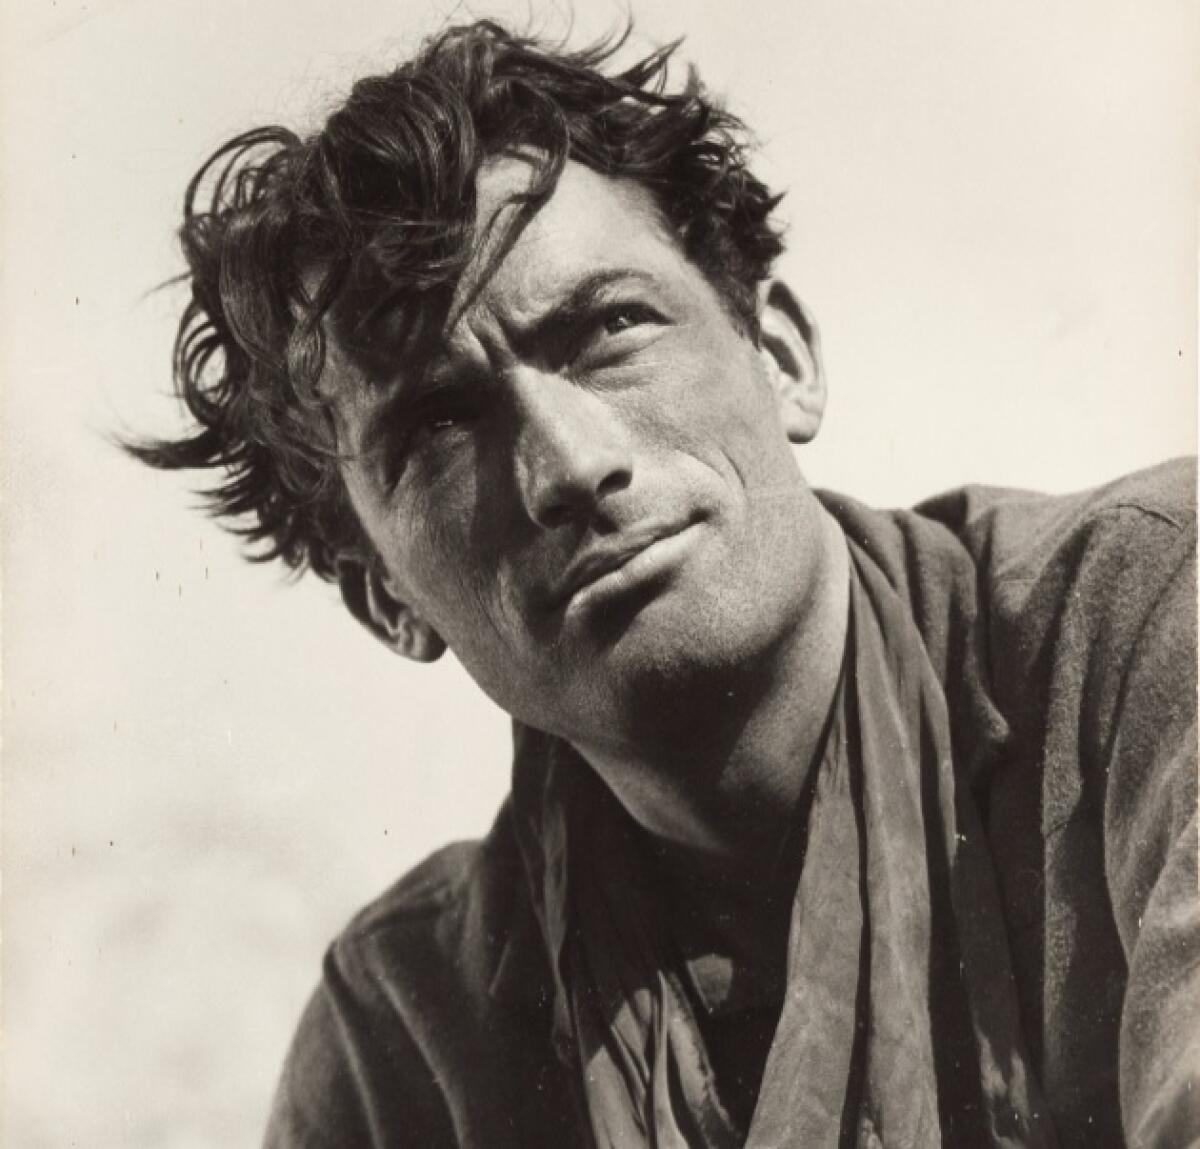 This Gregory Peck photo from the 1947 movie, "Duel in the Sun," is among 246 personal mementos that are being auctioned.